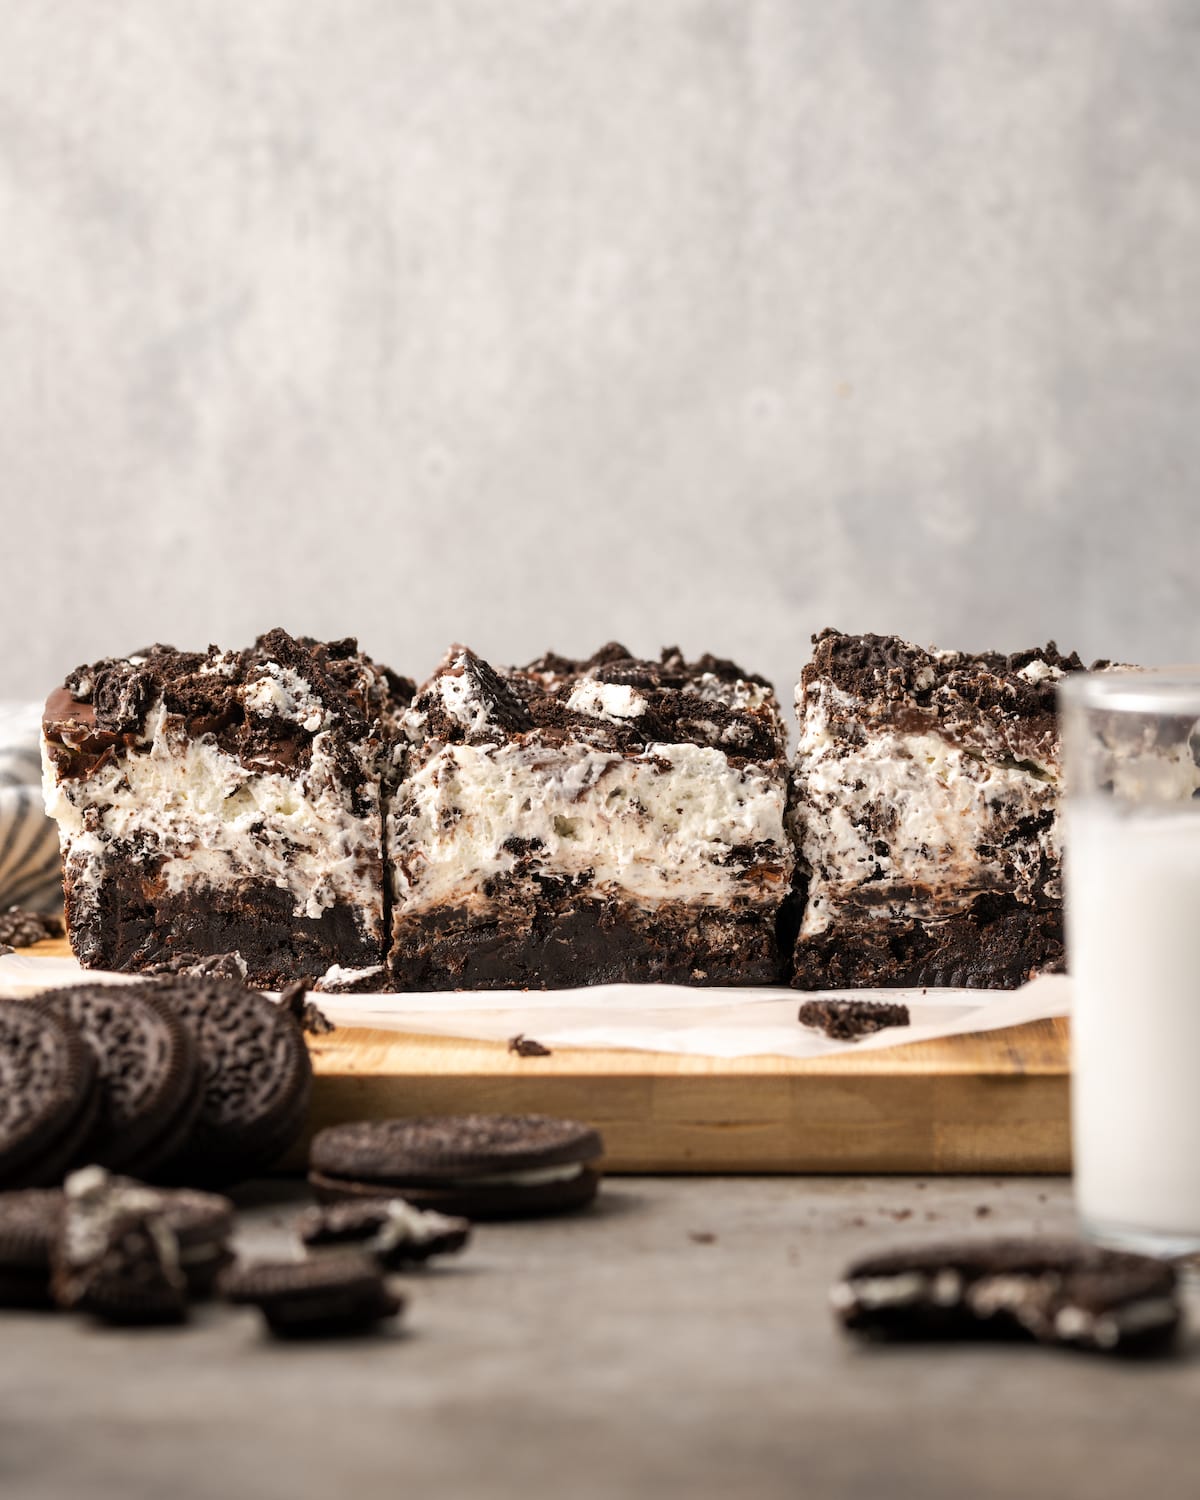 Oreo brownies on a wooden platter next to a glass of milk and chopped Oreo cookies.